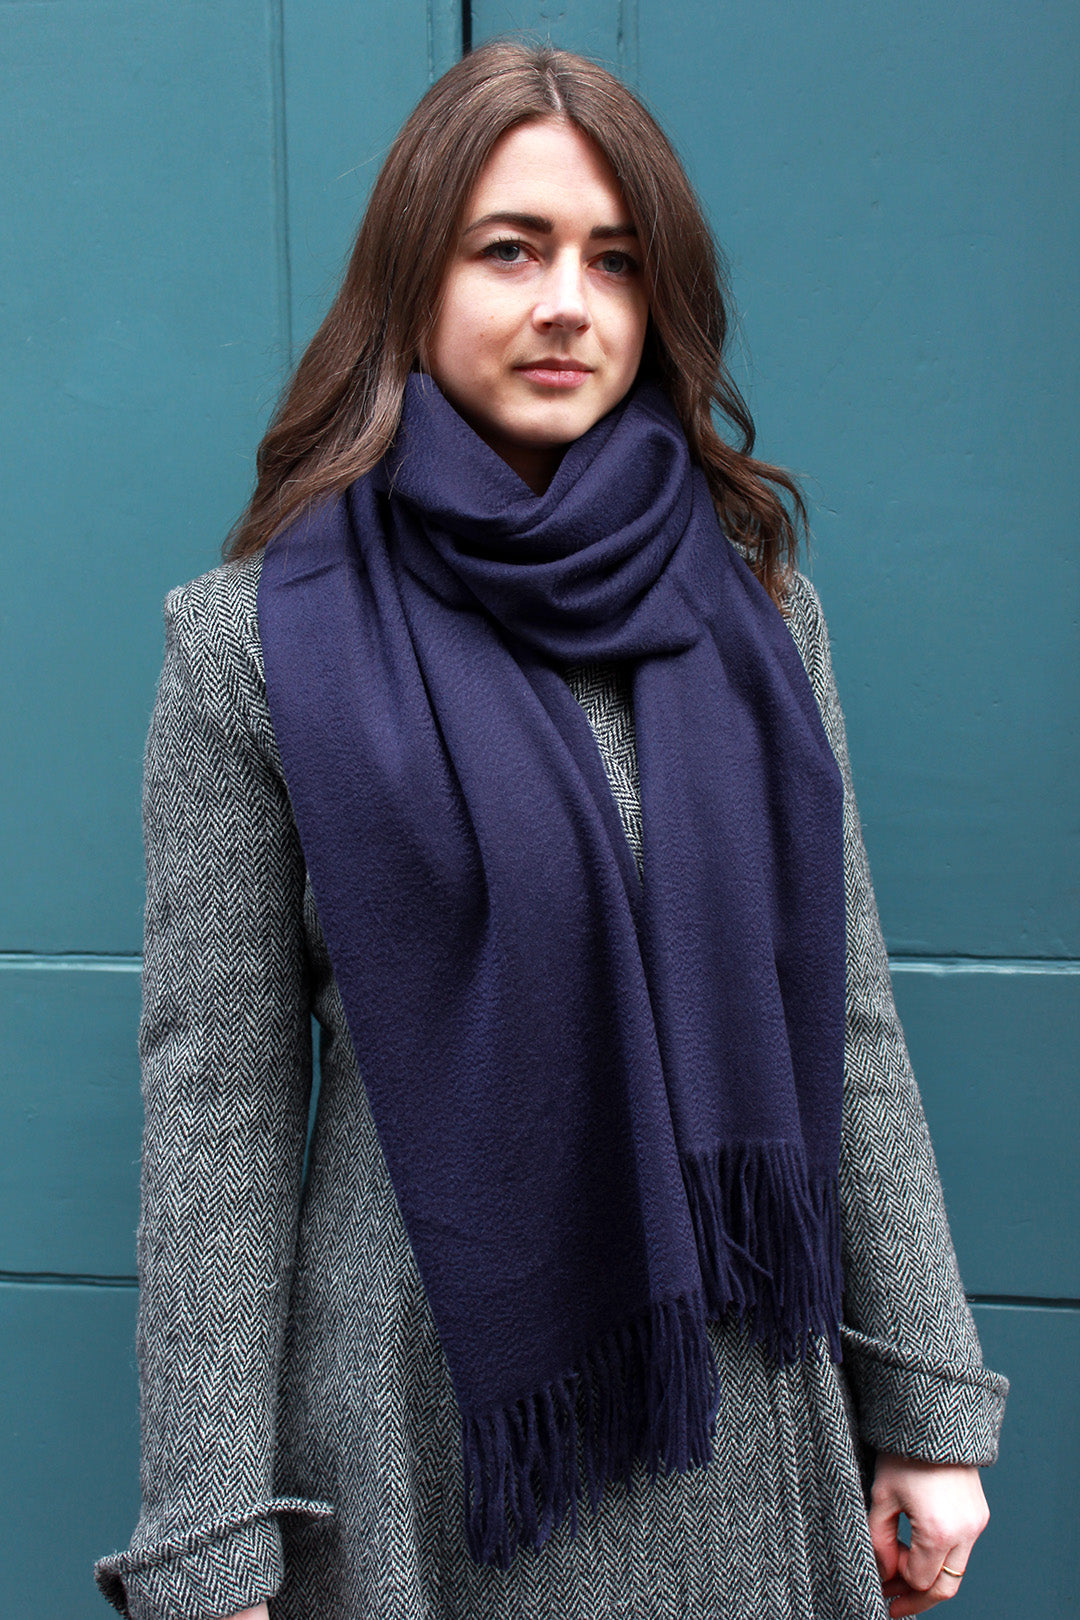 Luxurious pure cashmere stole in a classic Navy, woven by cashmere specialists Johnstons of Elgin.